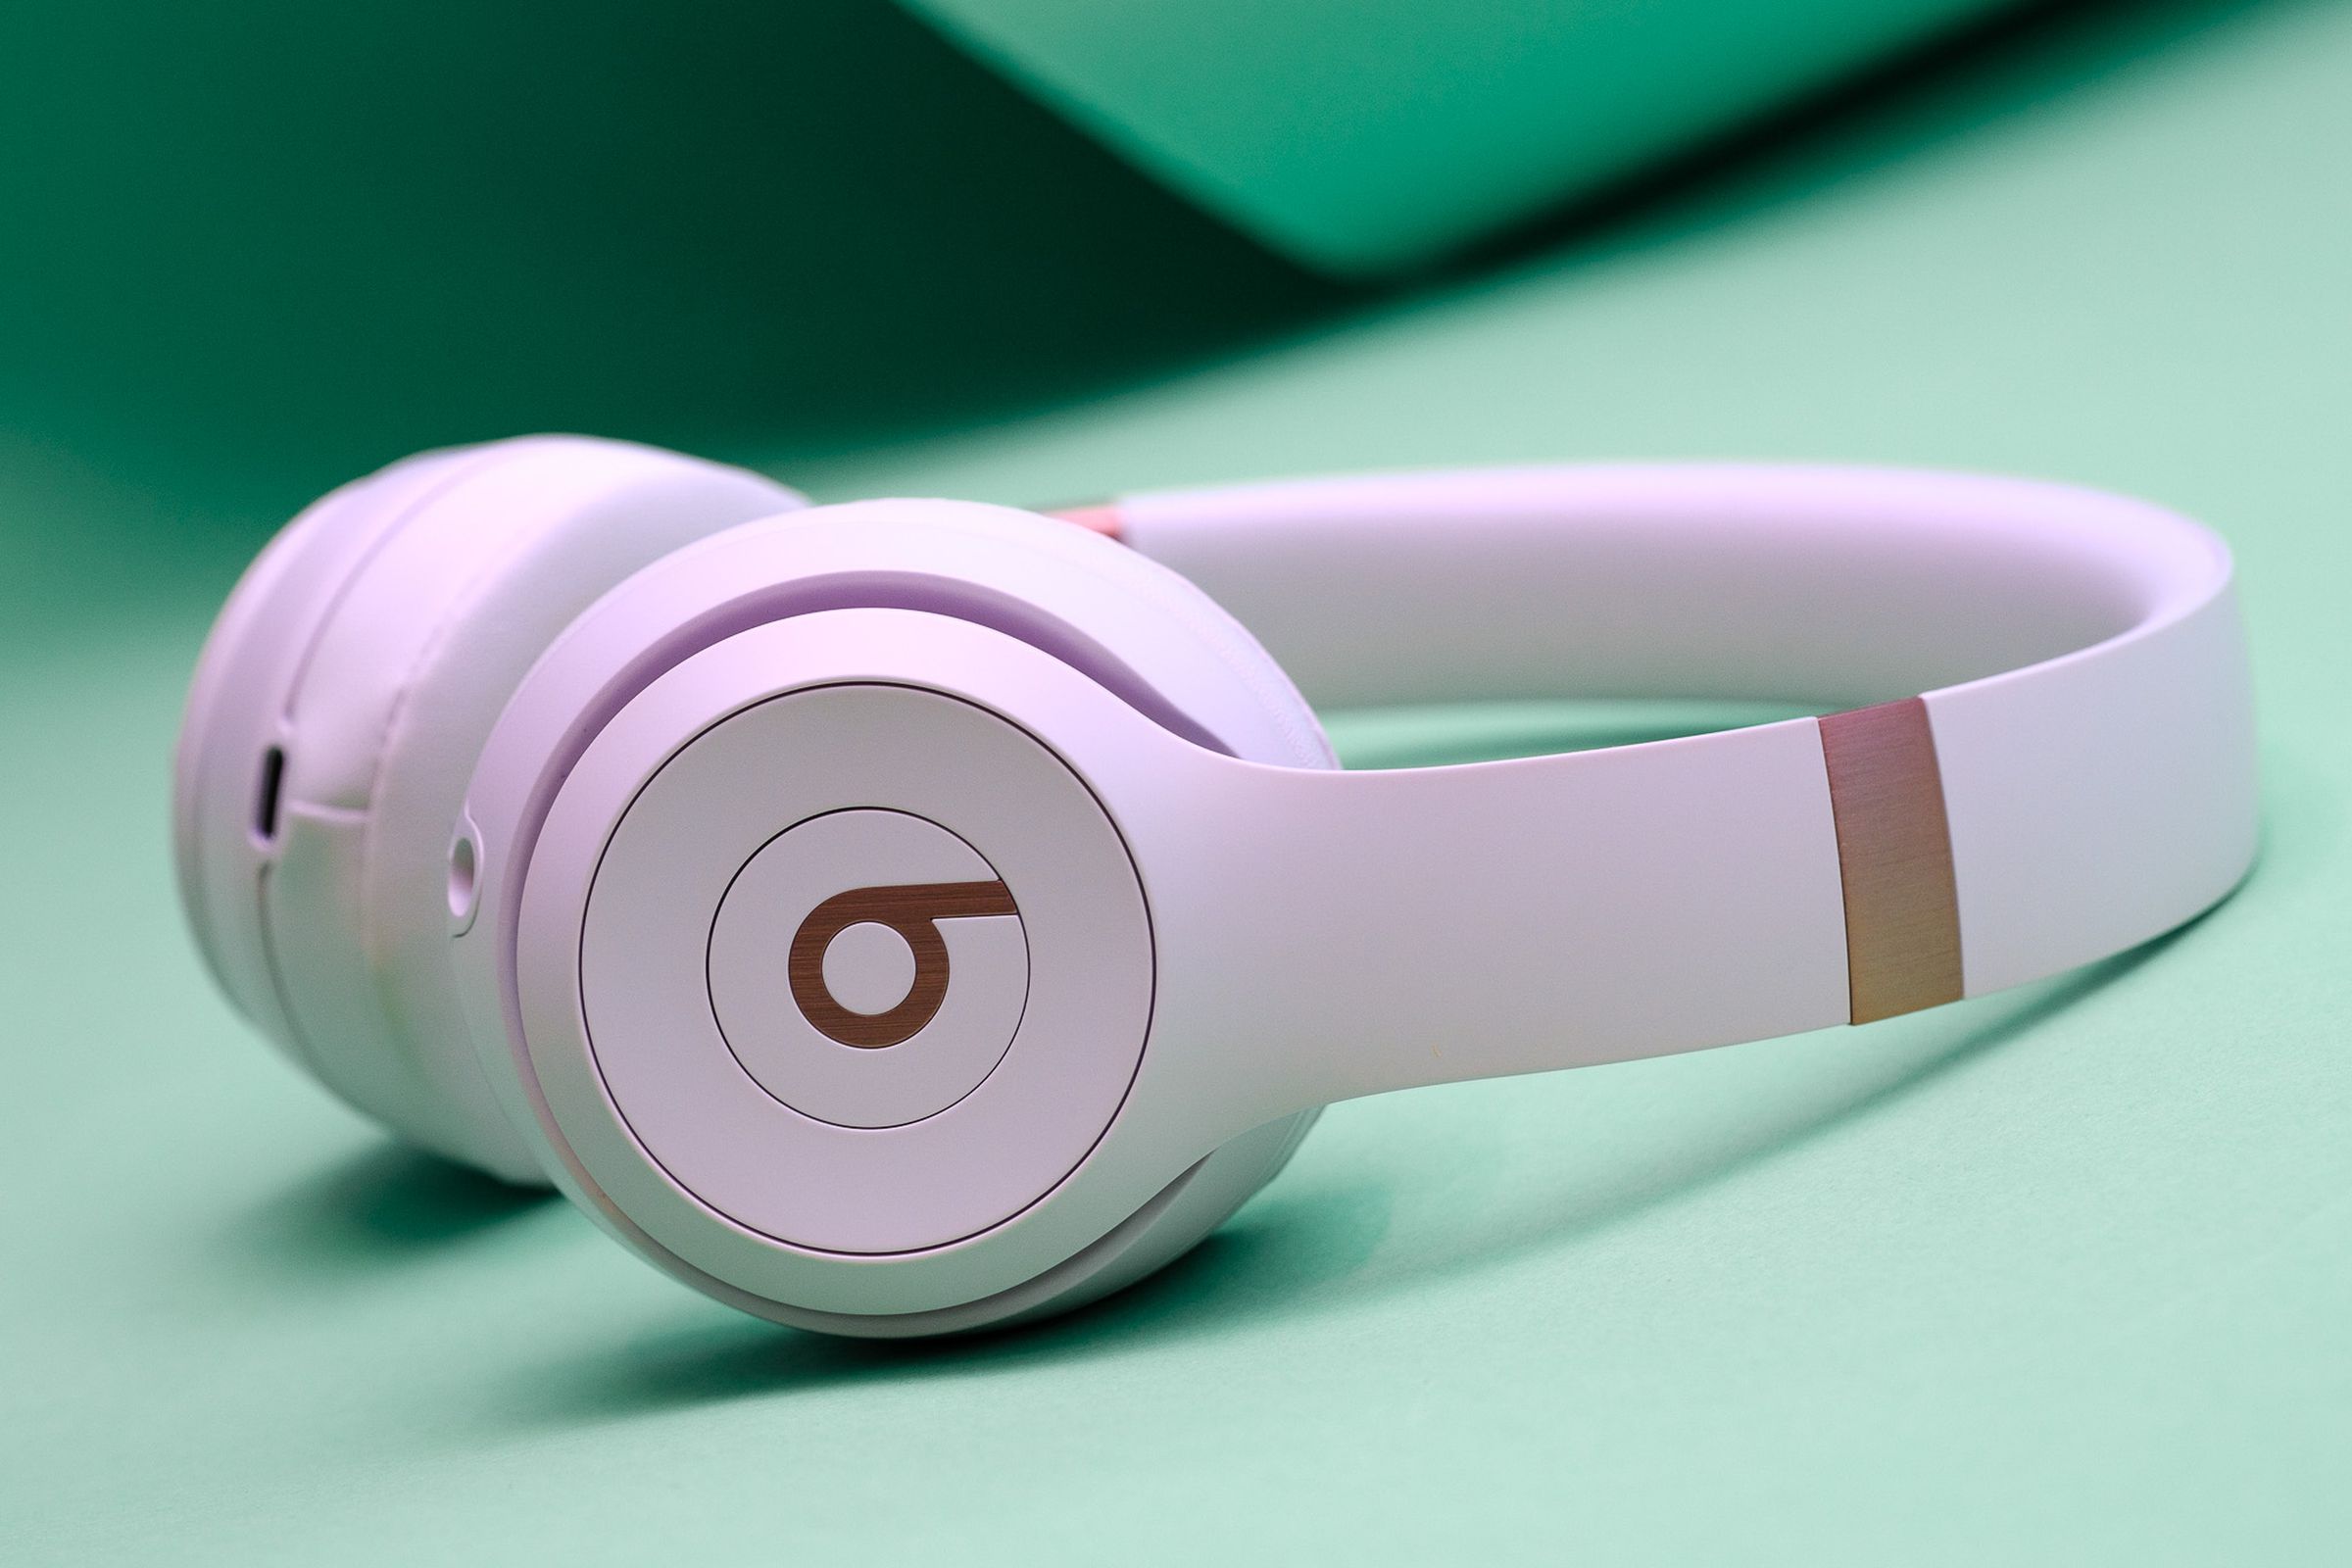 A photo of the Beats Solo 4 wireless headphones.